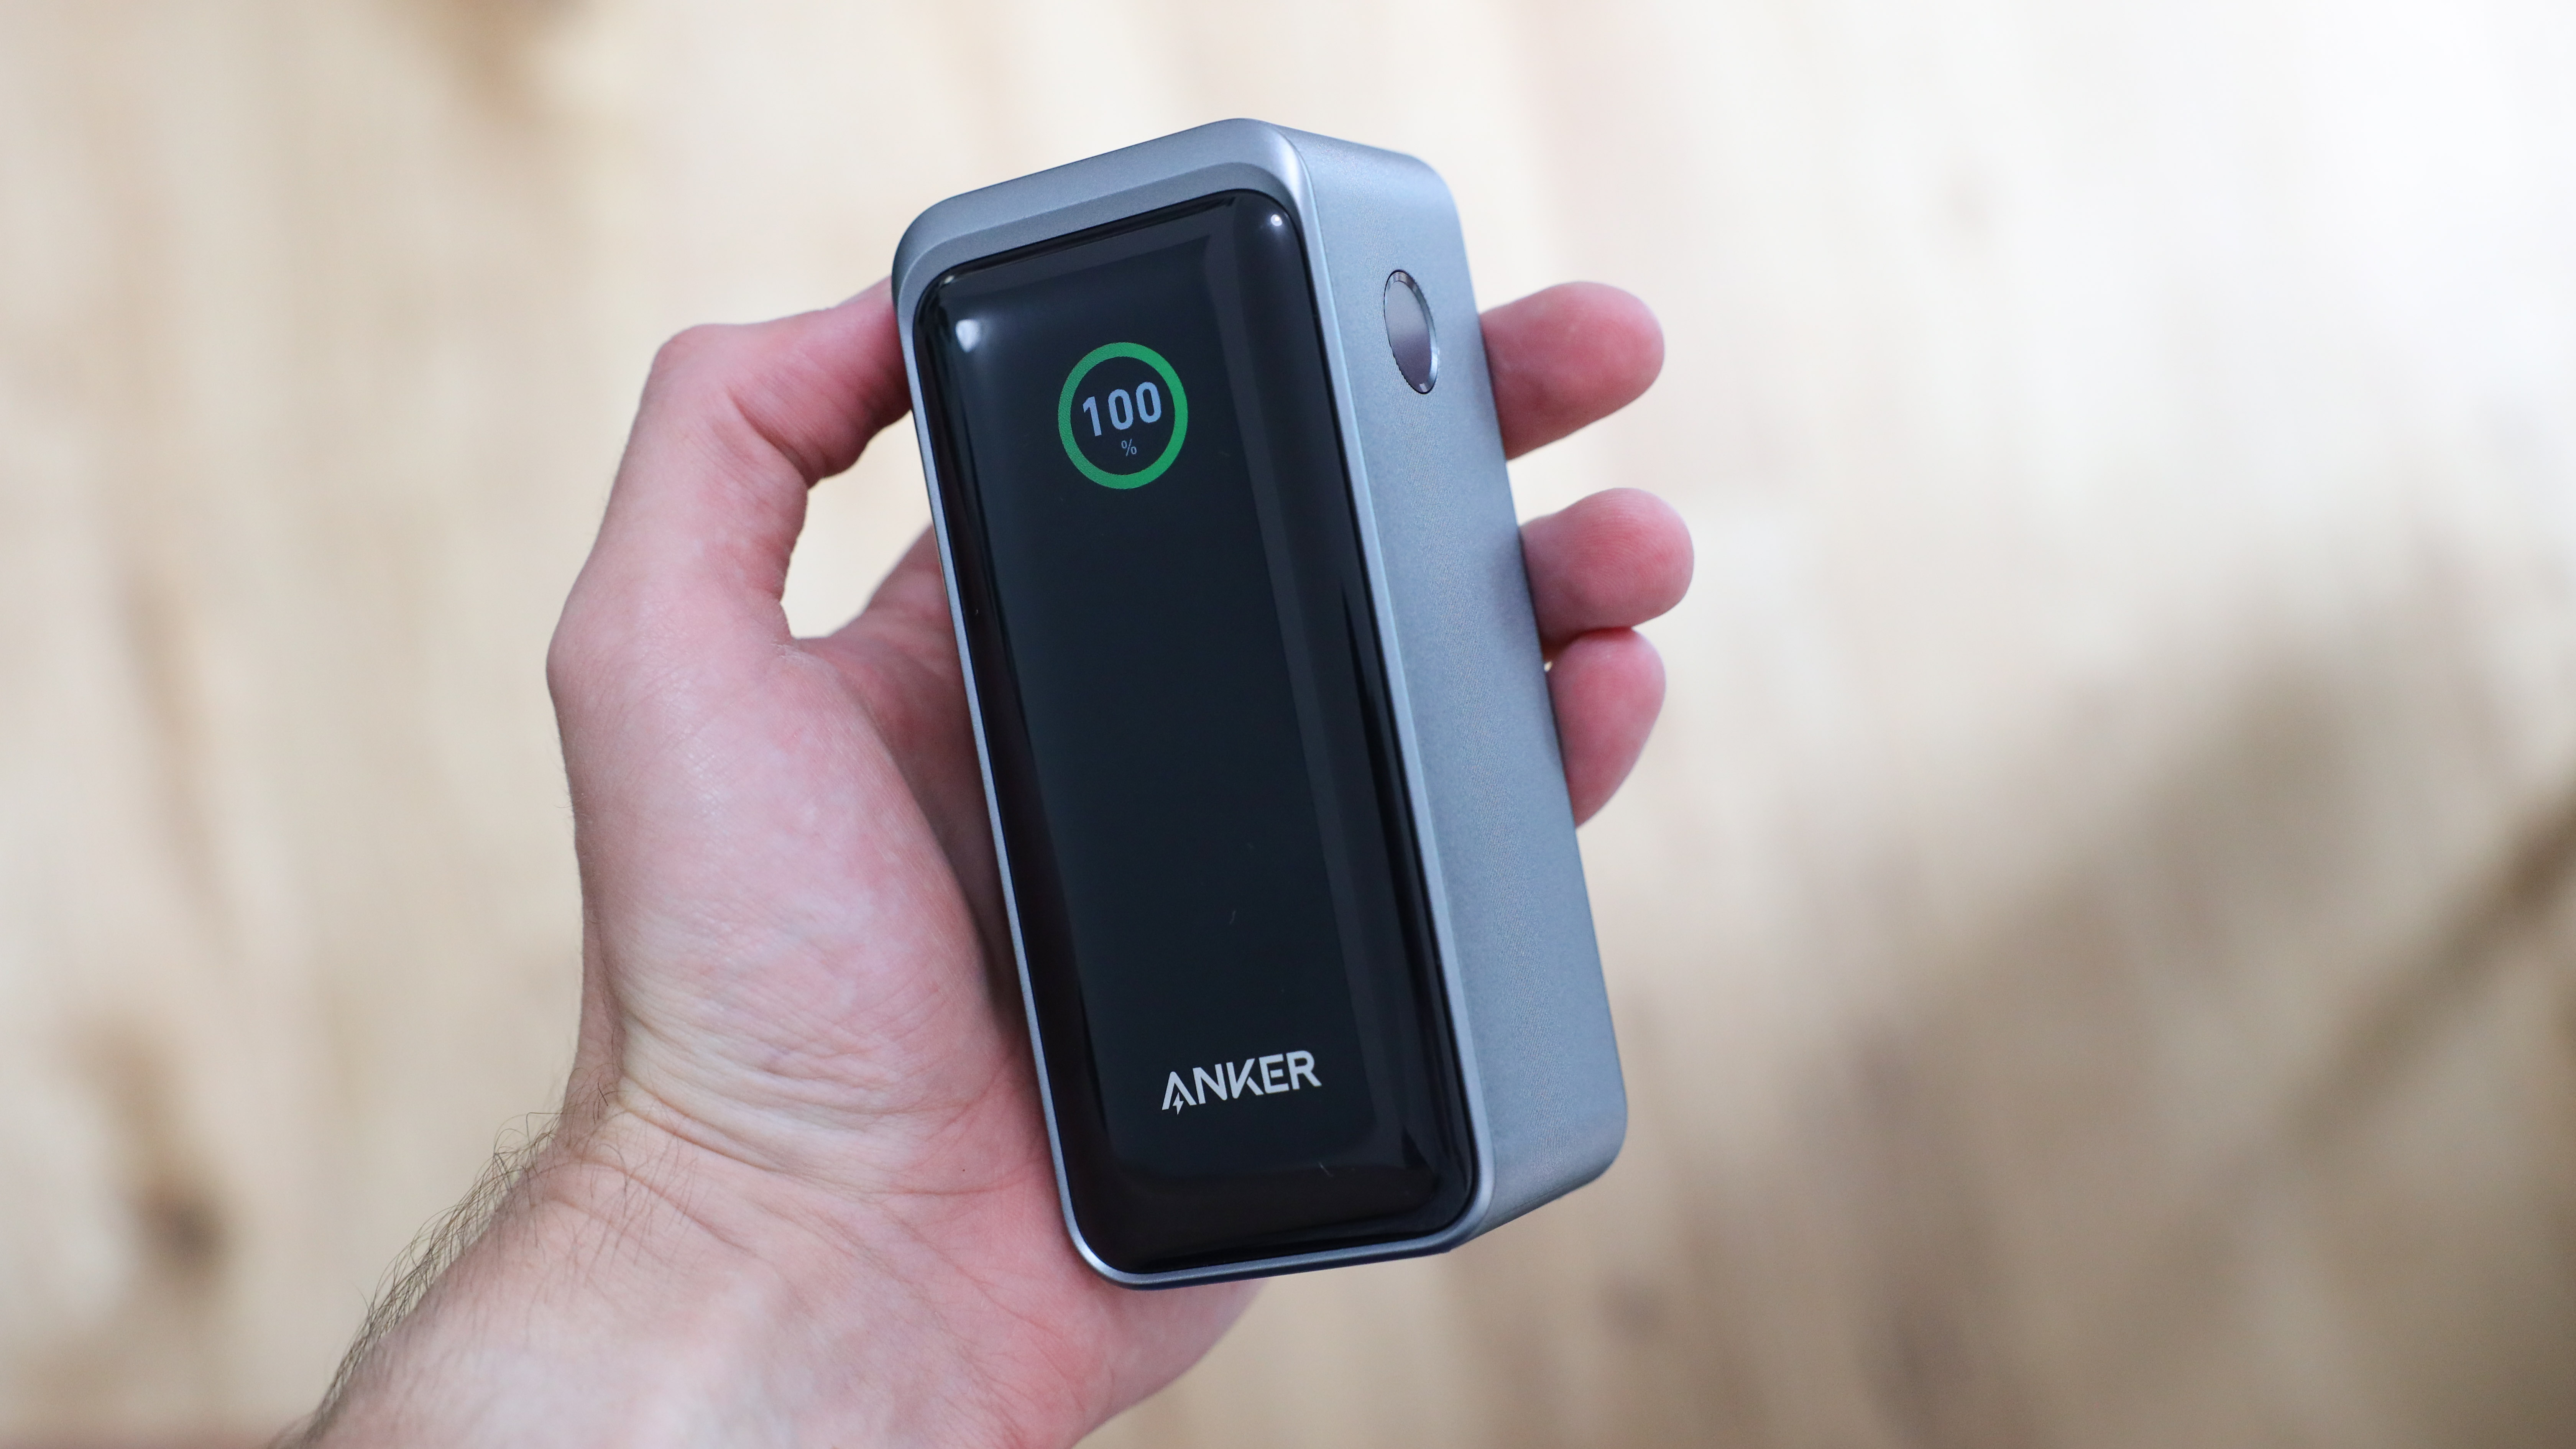 Anker Prime 20,000 mAh hands-on review: Large high-performance power bank  with helpful display -  Reviews